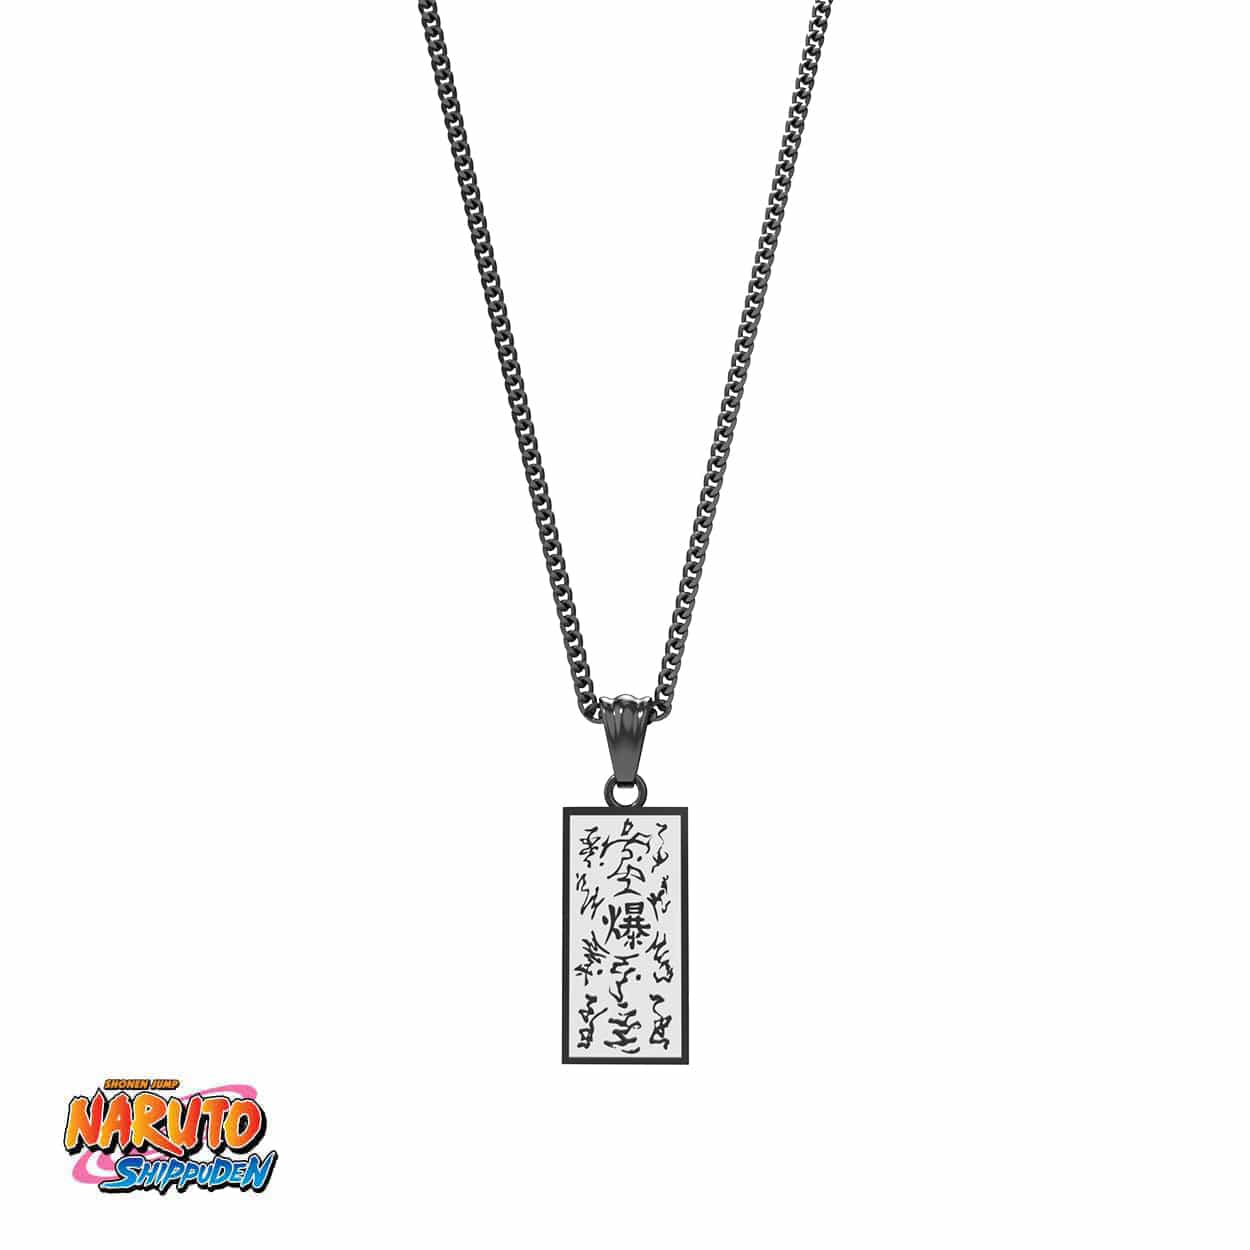 Naruto™ Explosive Tag Necklace Mister SFC